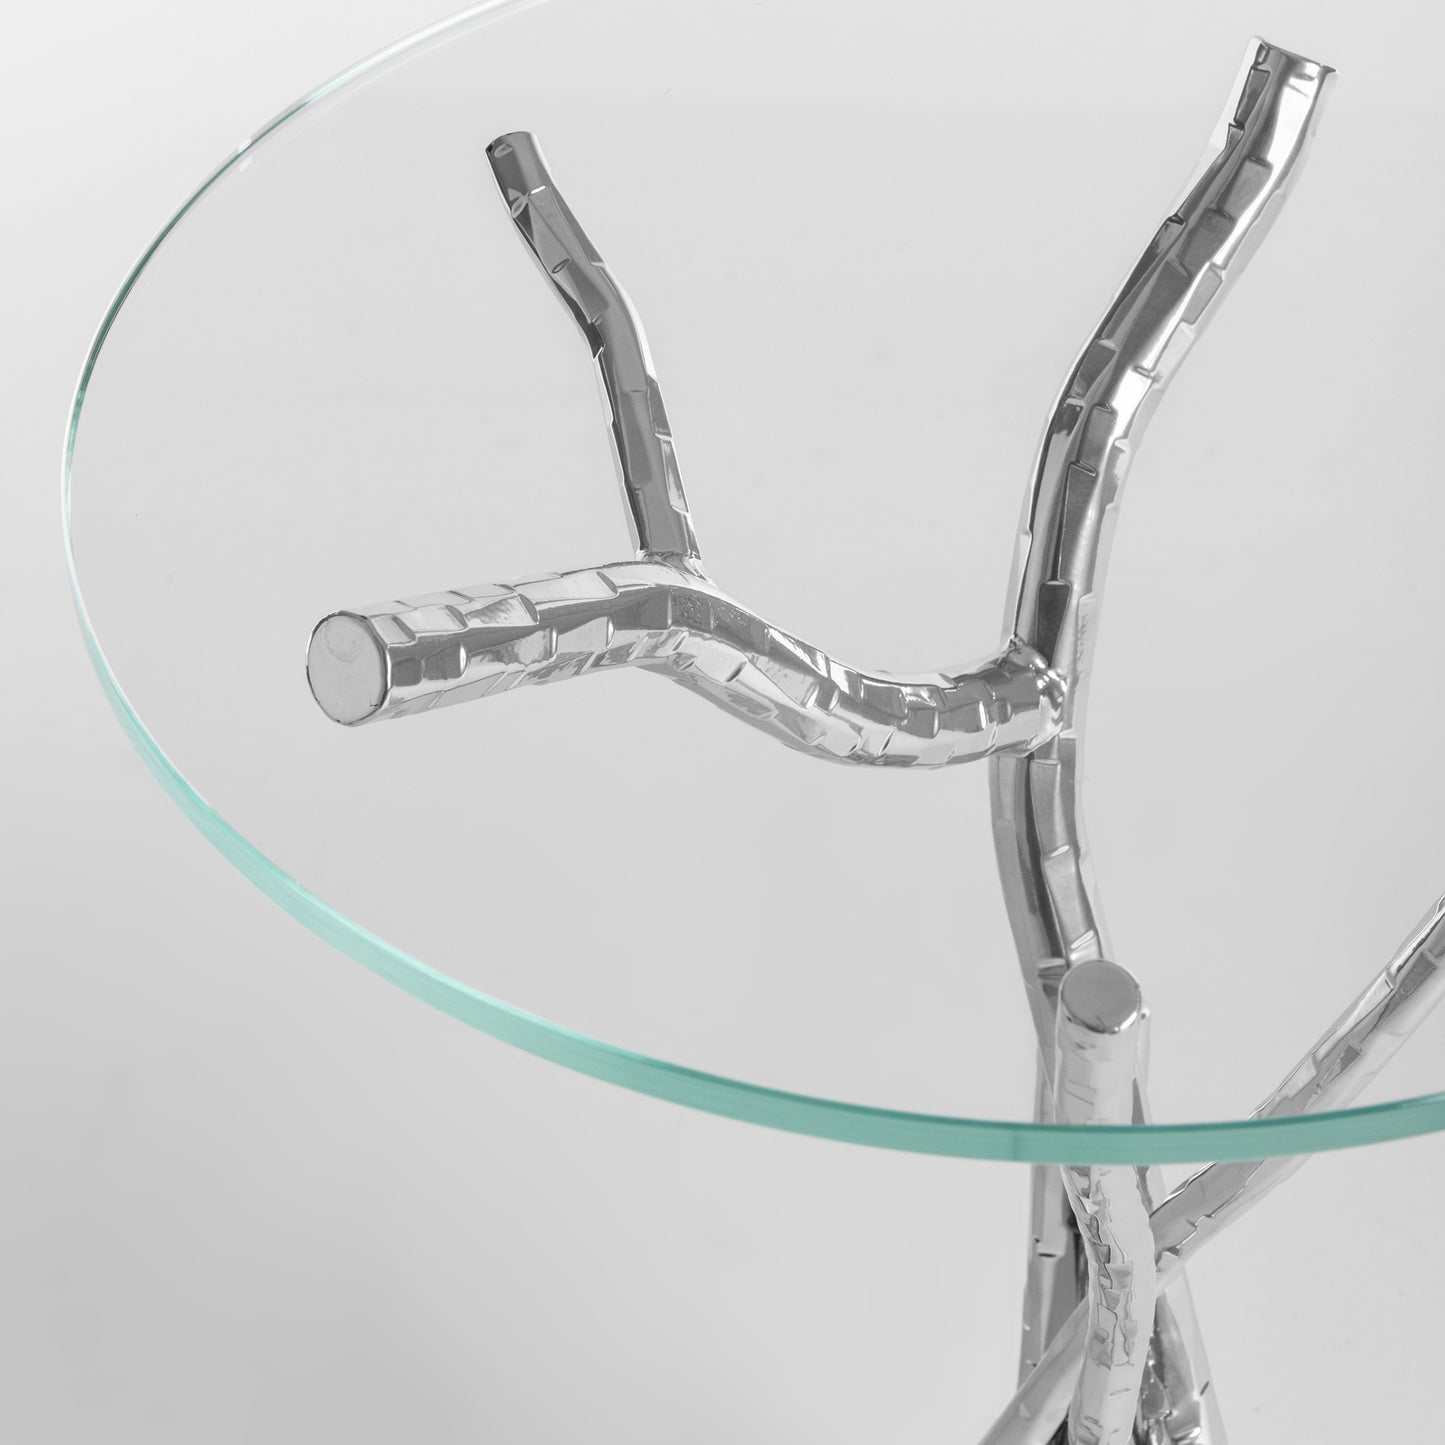 A Brindille Accent Table by Hubbardton Forge, with branches on it, featuring a hand-hammered steel base.